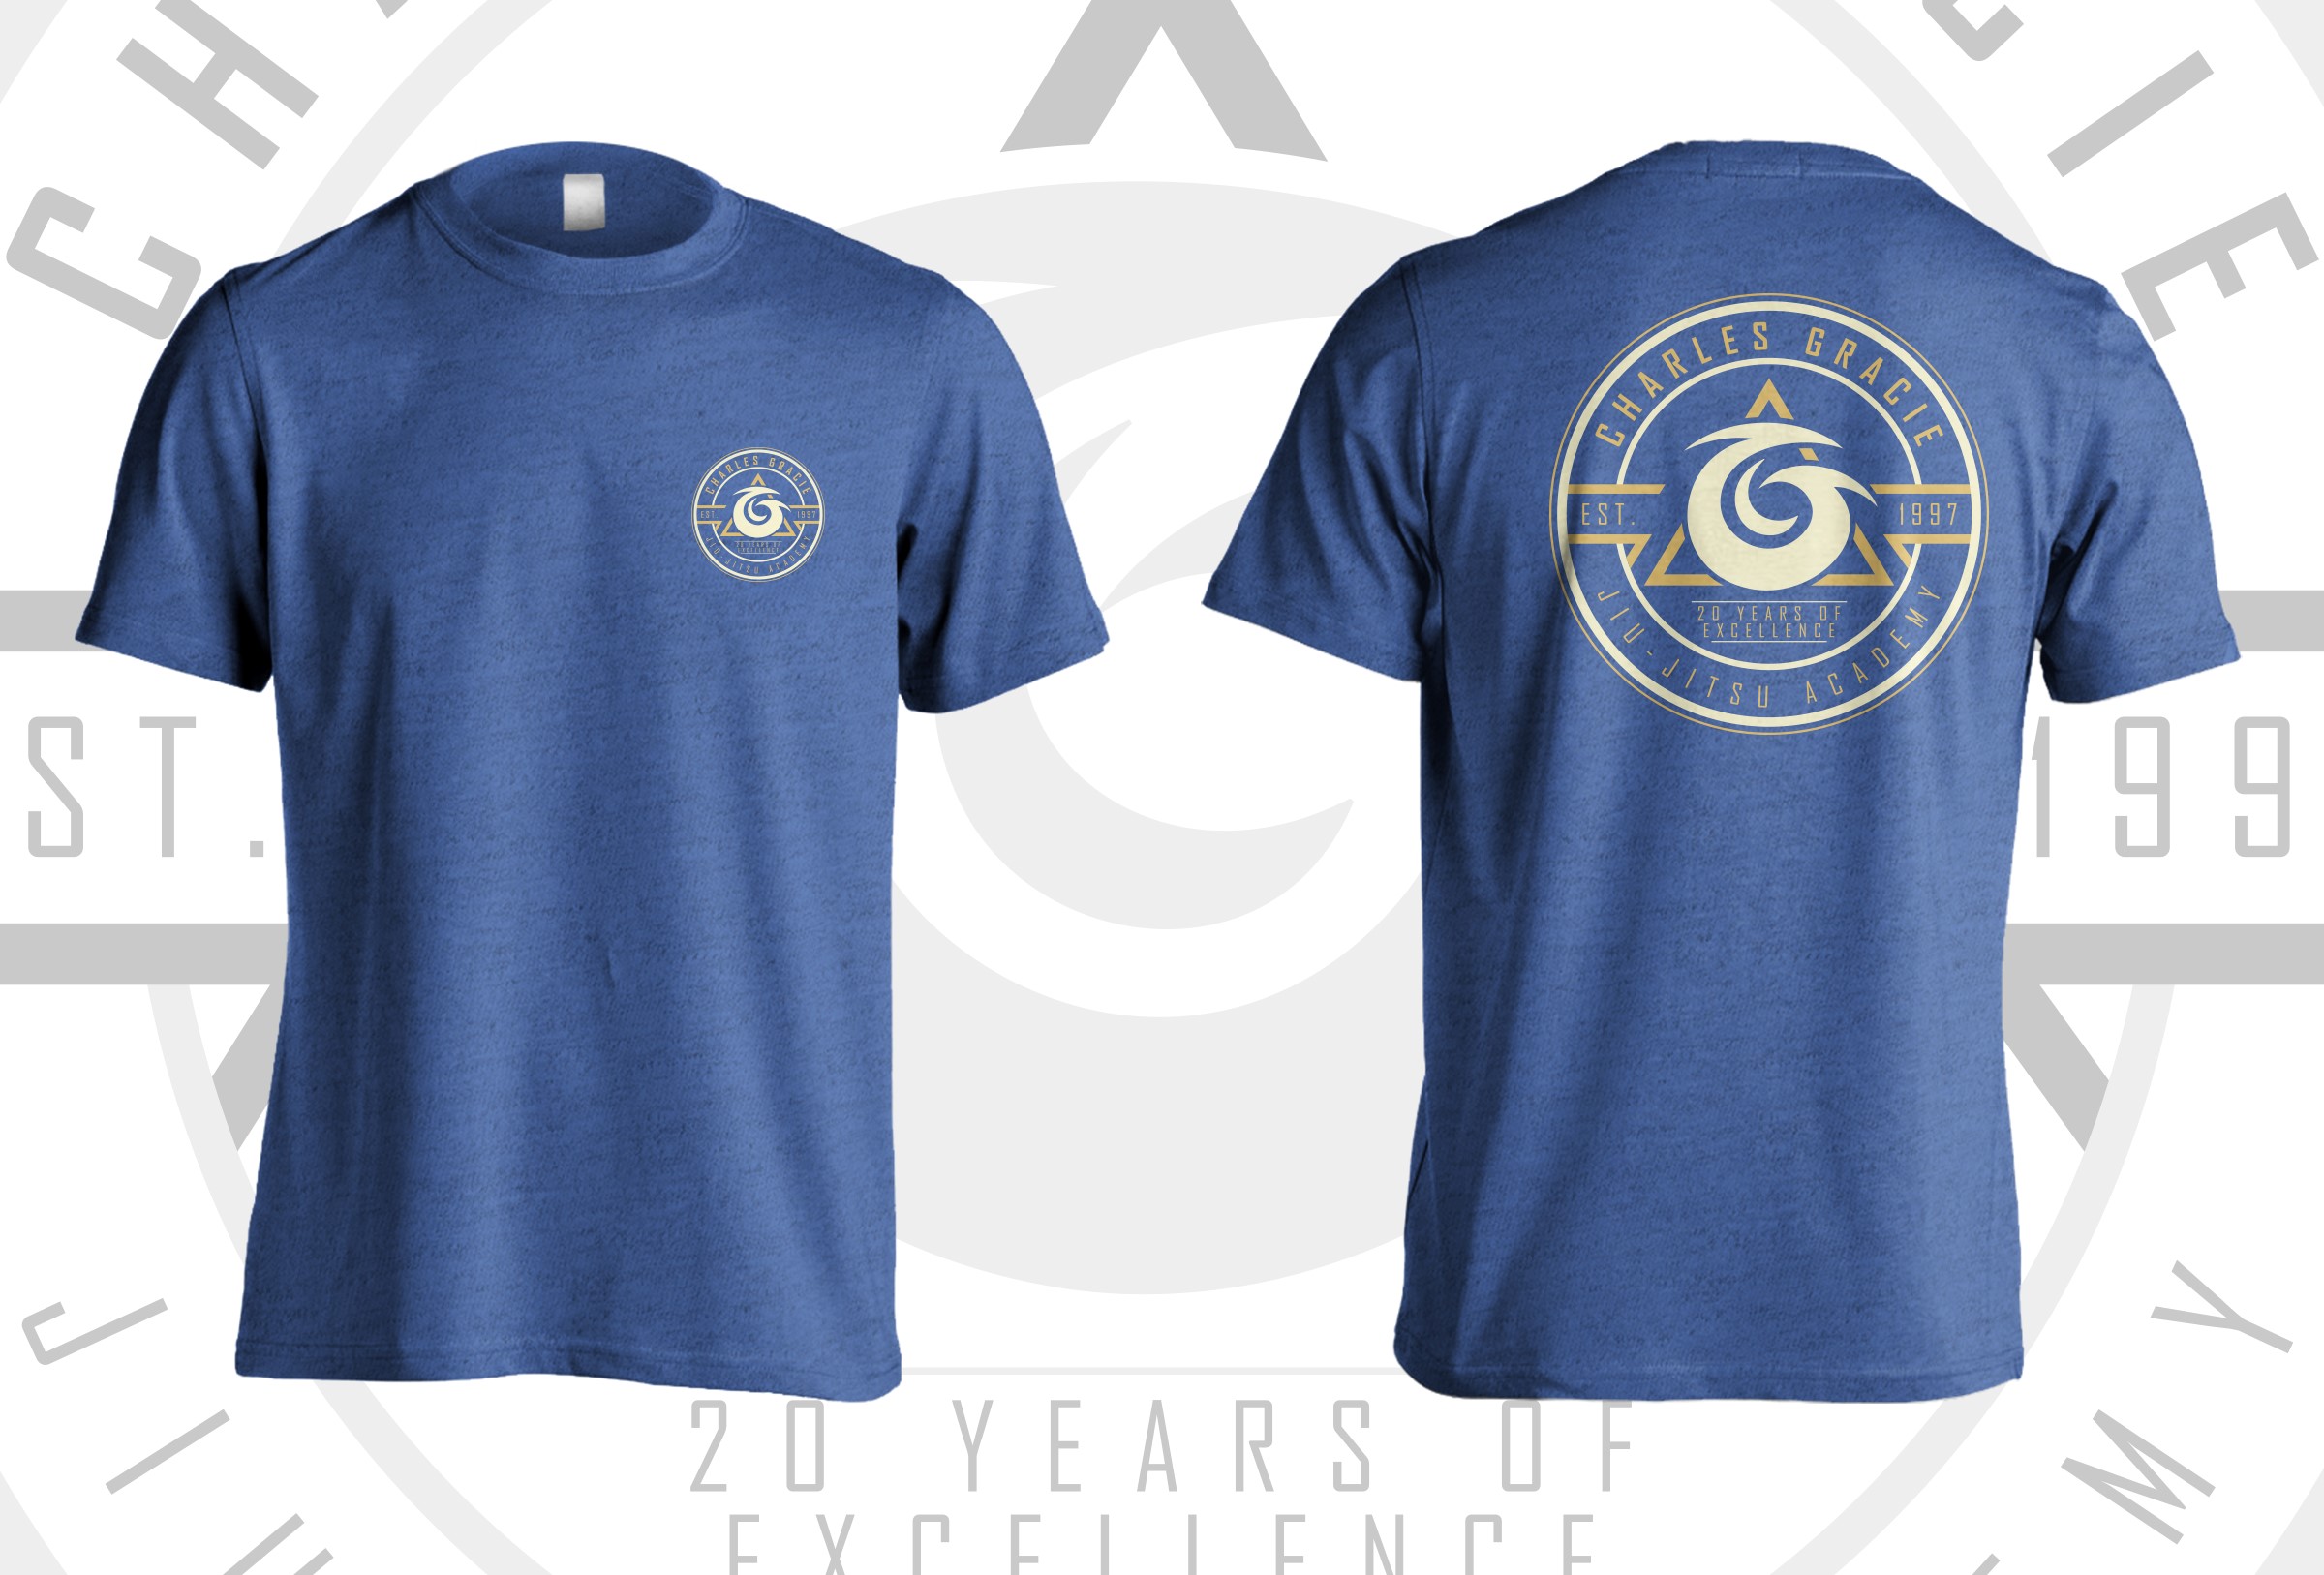 Excellence Tee - Charles Gracie